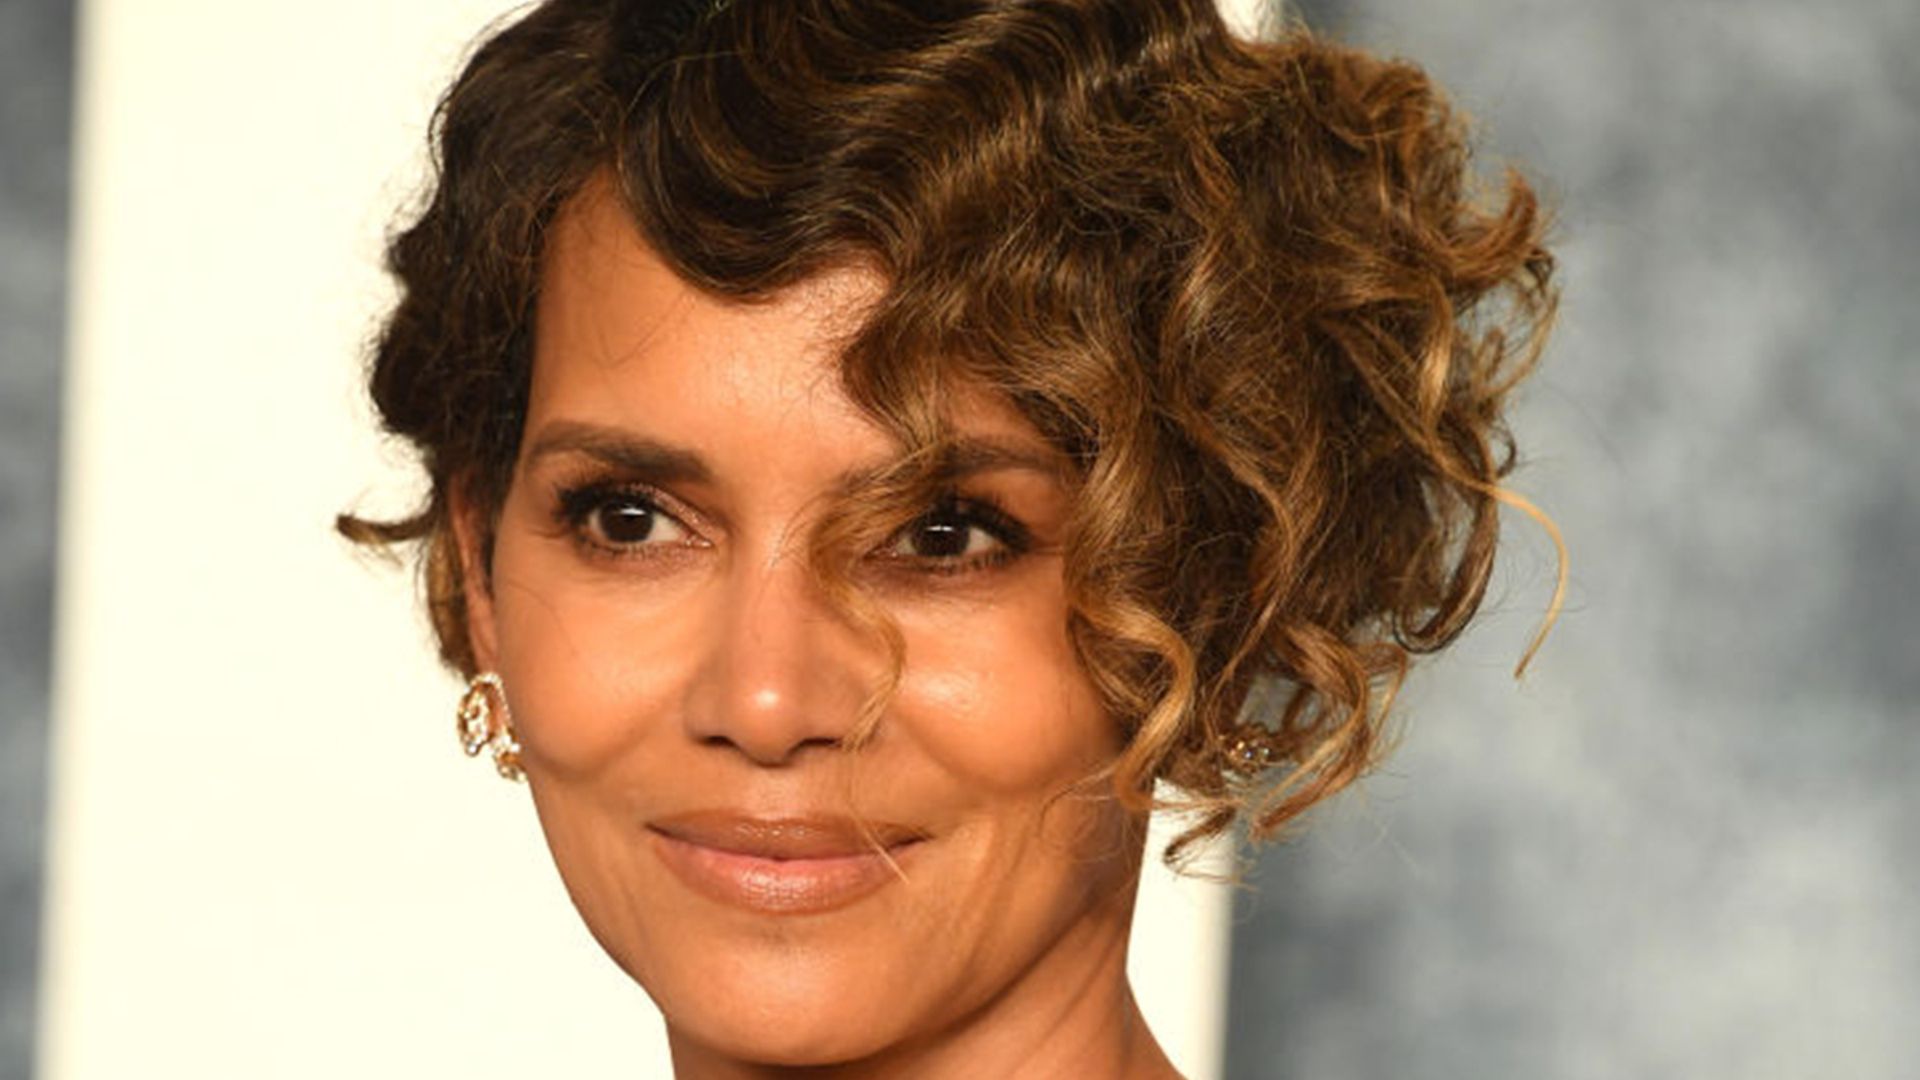 Halle Berry's rarely-seen teenage daughter looks unrecognizable in new photos